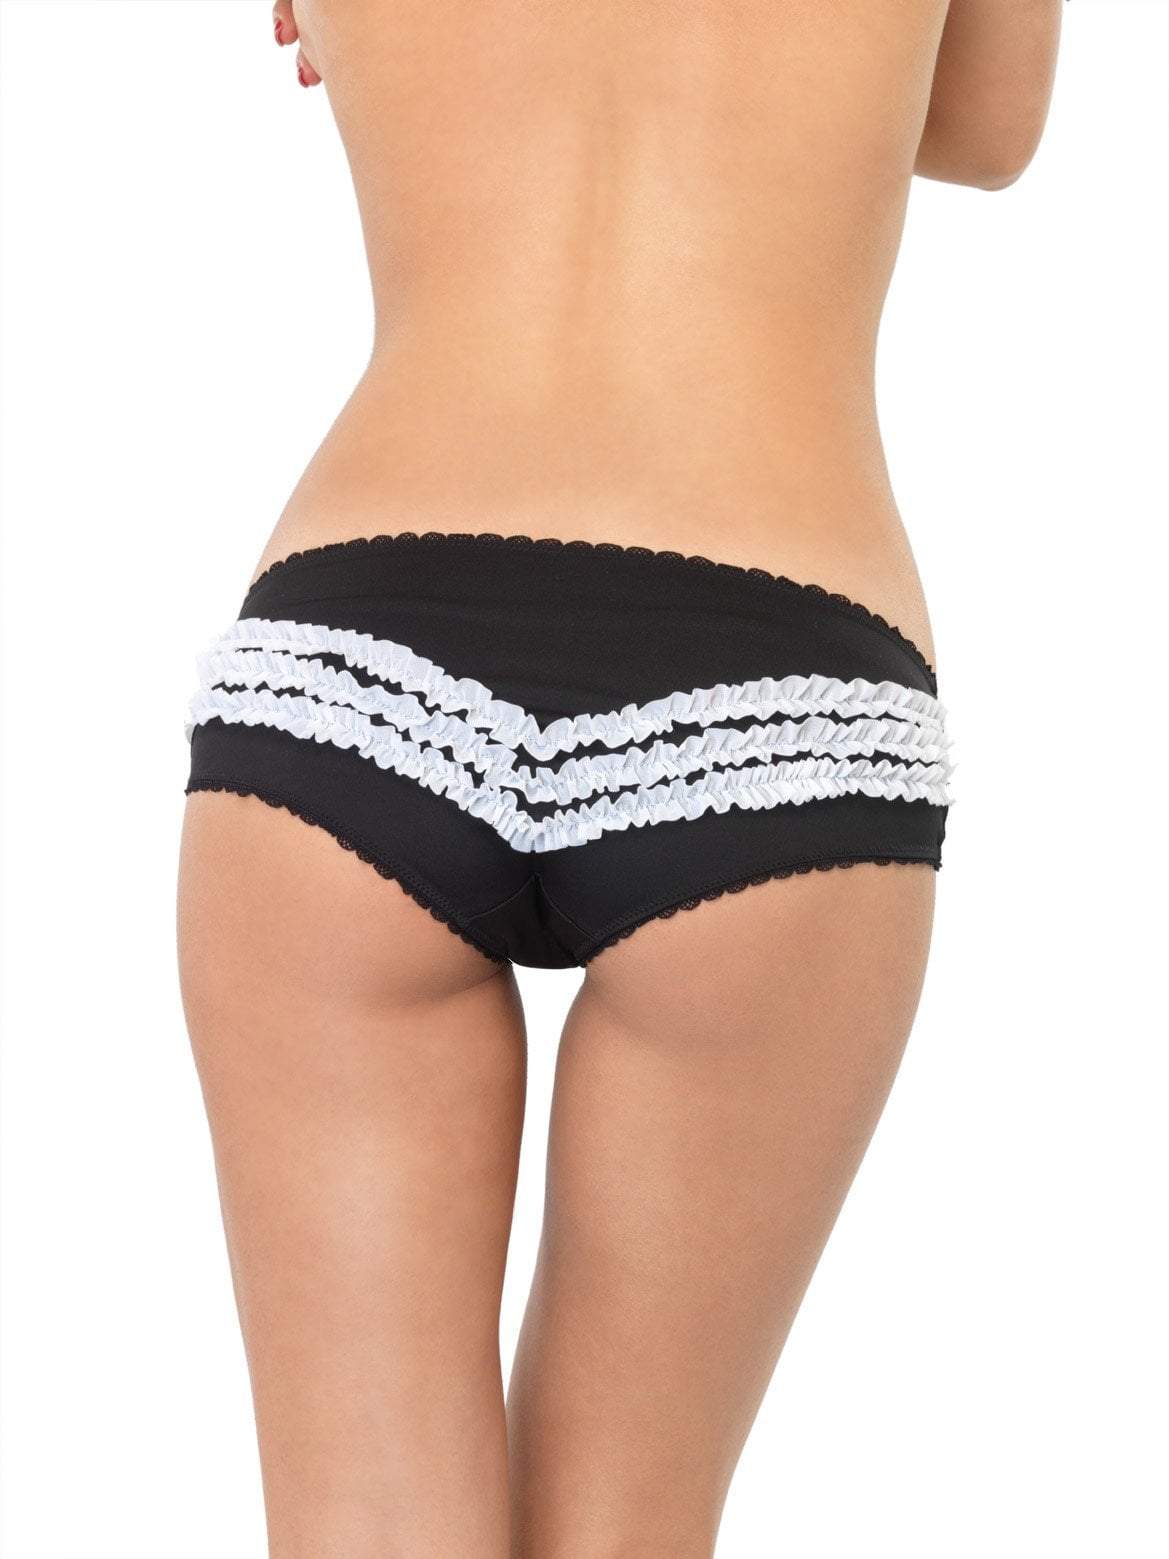 Black Panty with White Ruffle Back - JJ's Party House